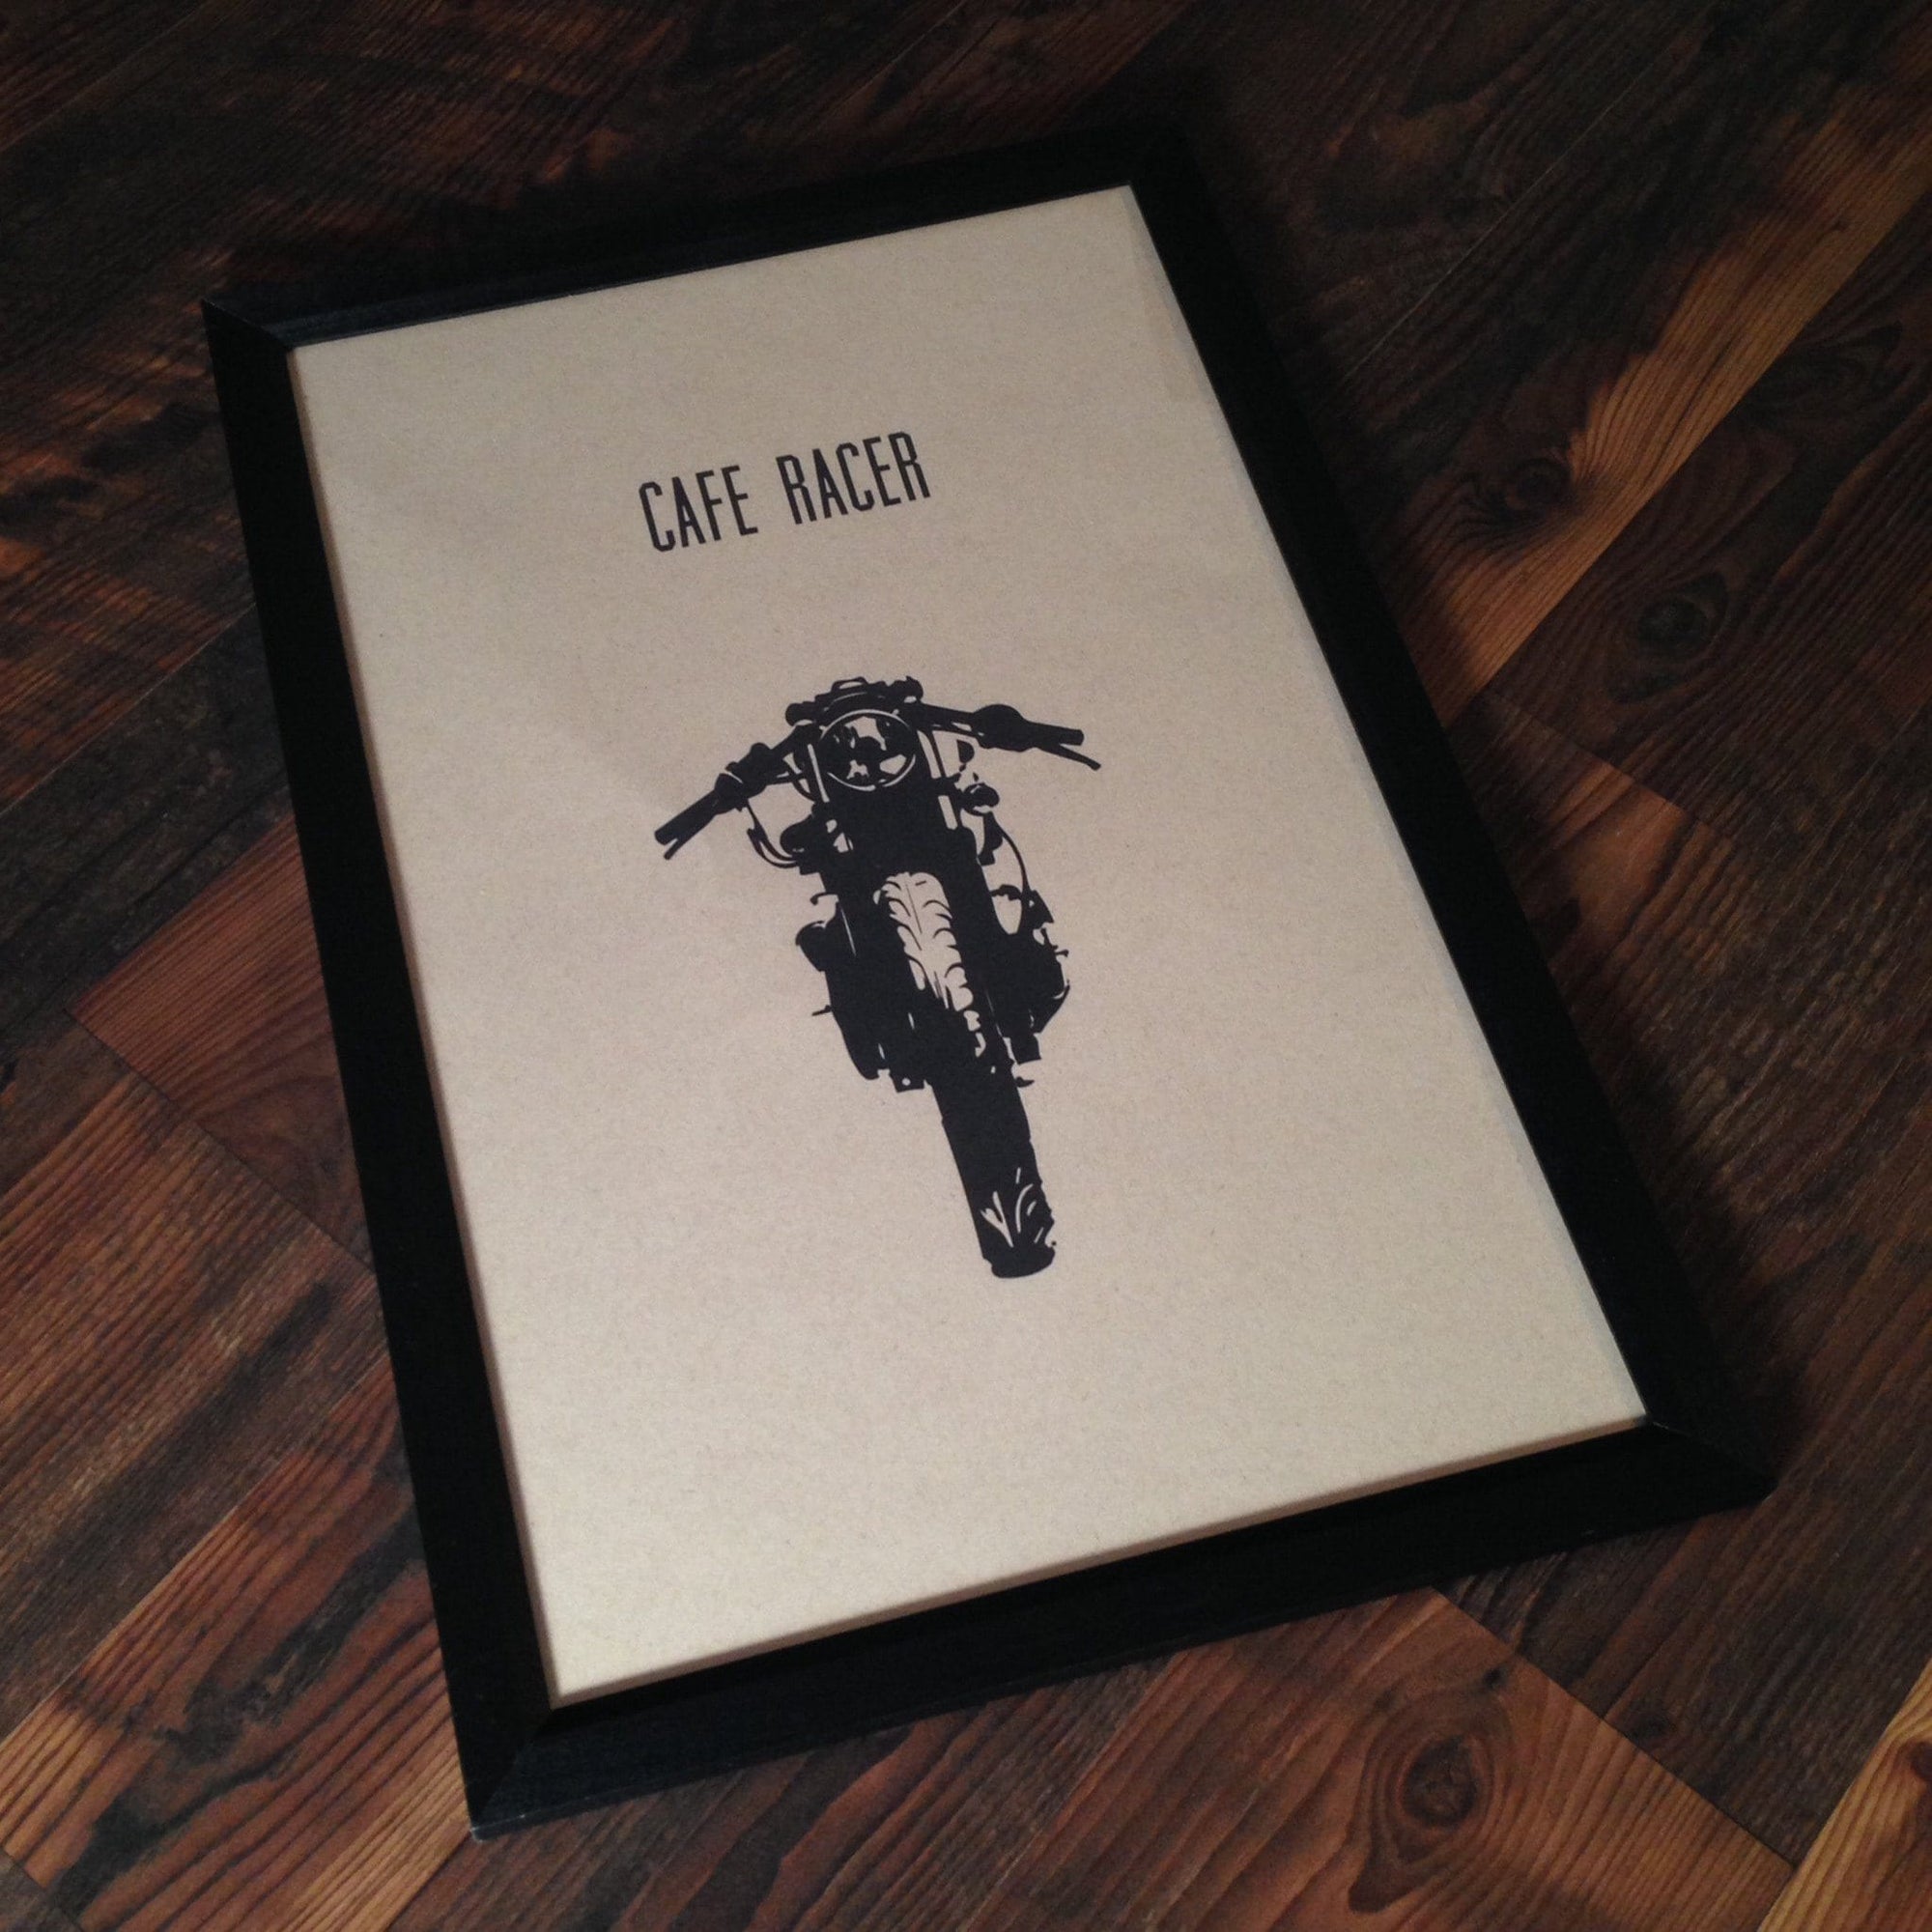 Limited Edition Cafe Racer Motorcycle Framed Poster by Inked Iron